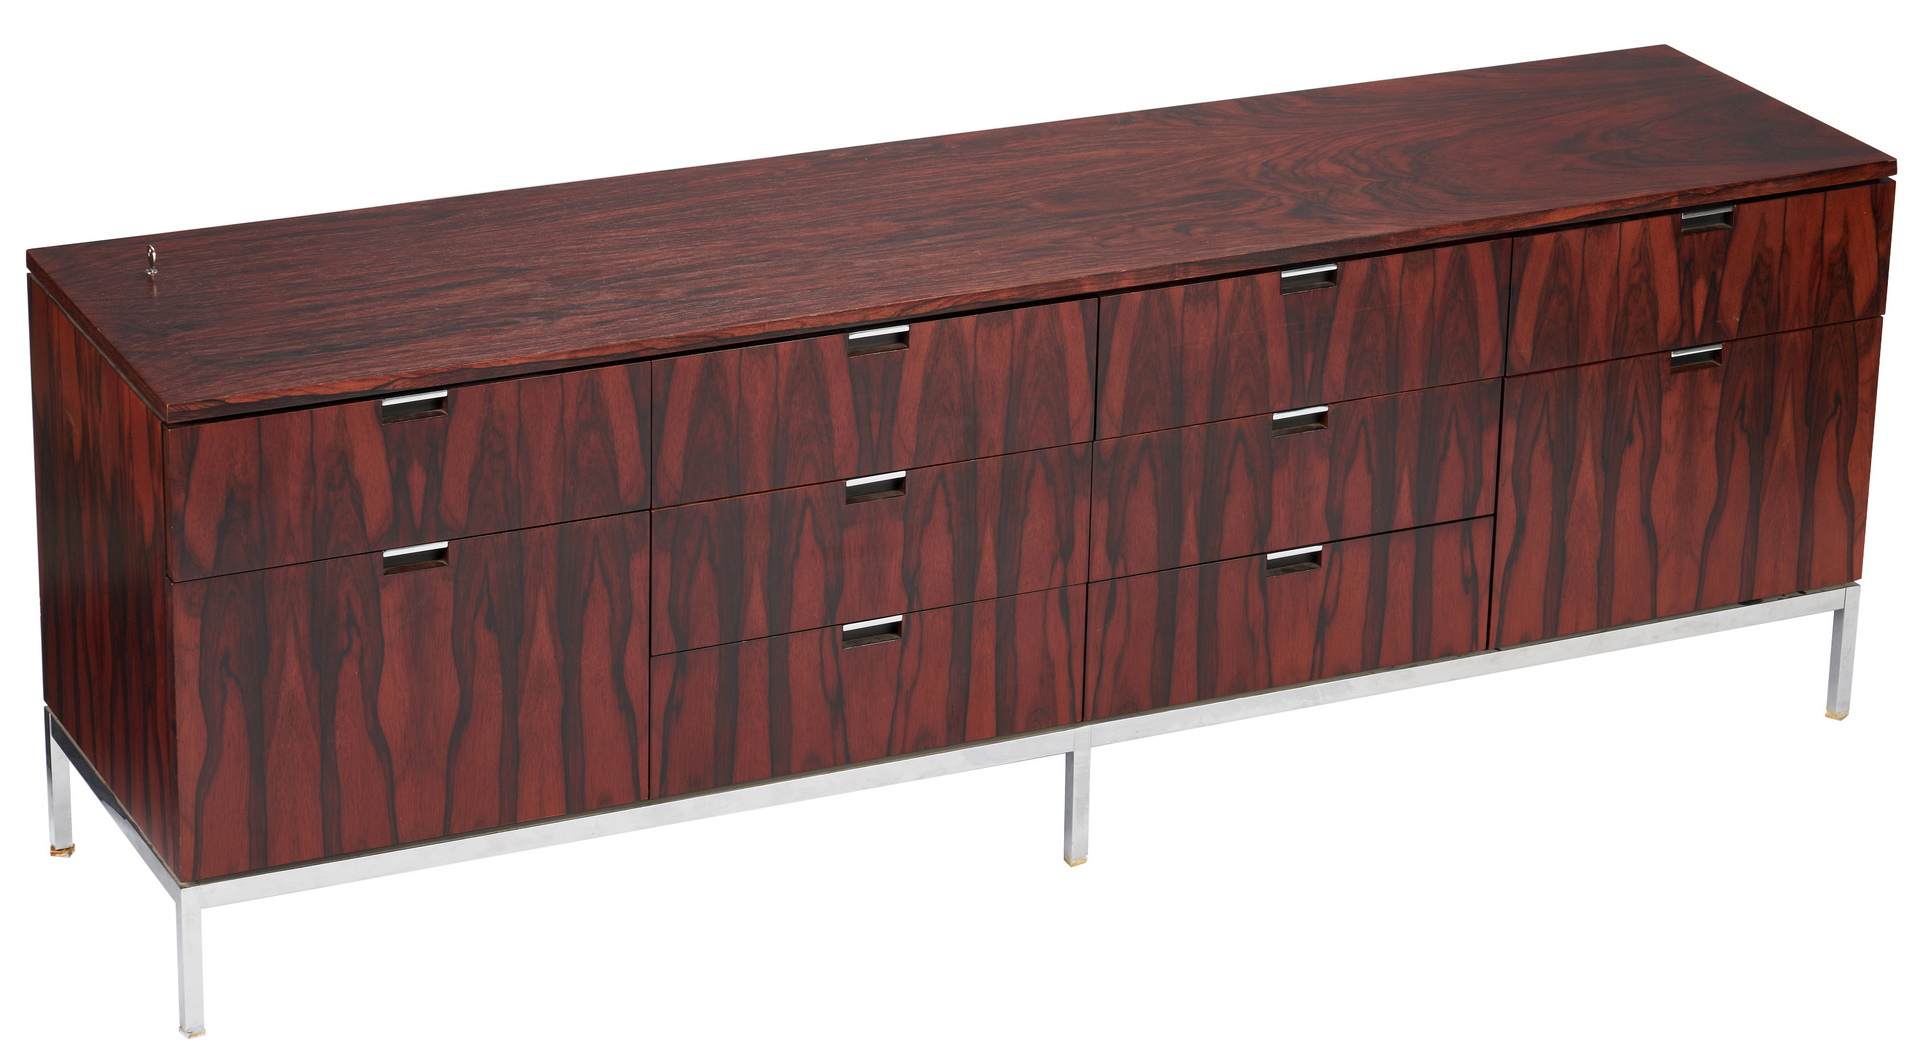 Lot 878: Knoll Rosewood Credenza or Sideboard, wood top